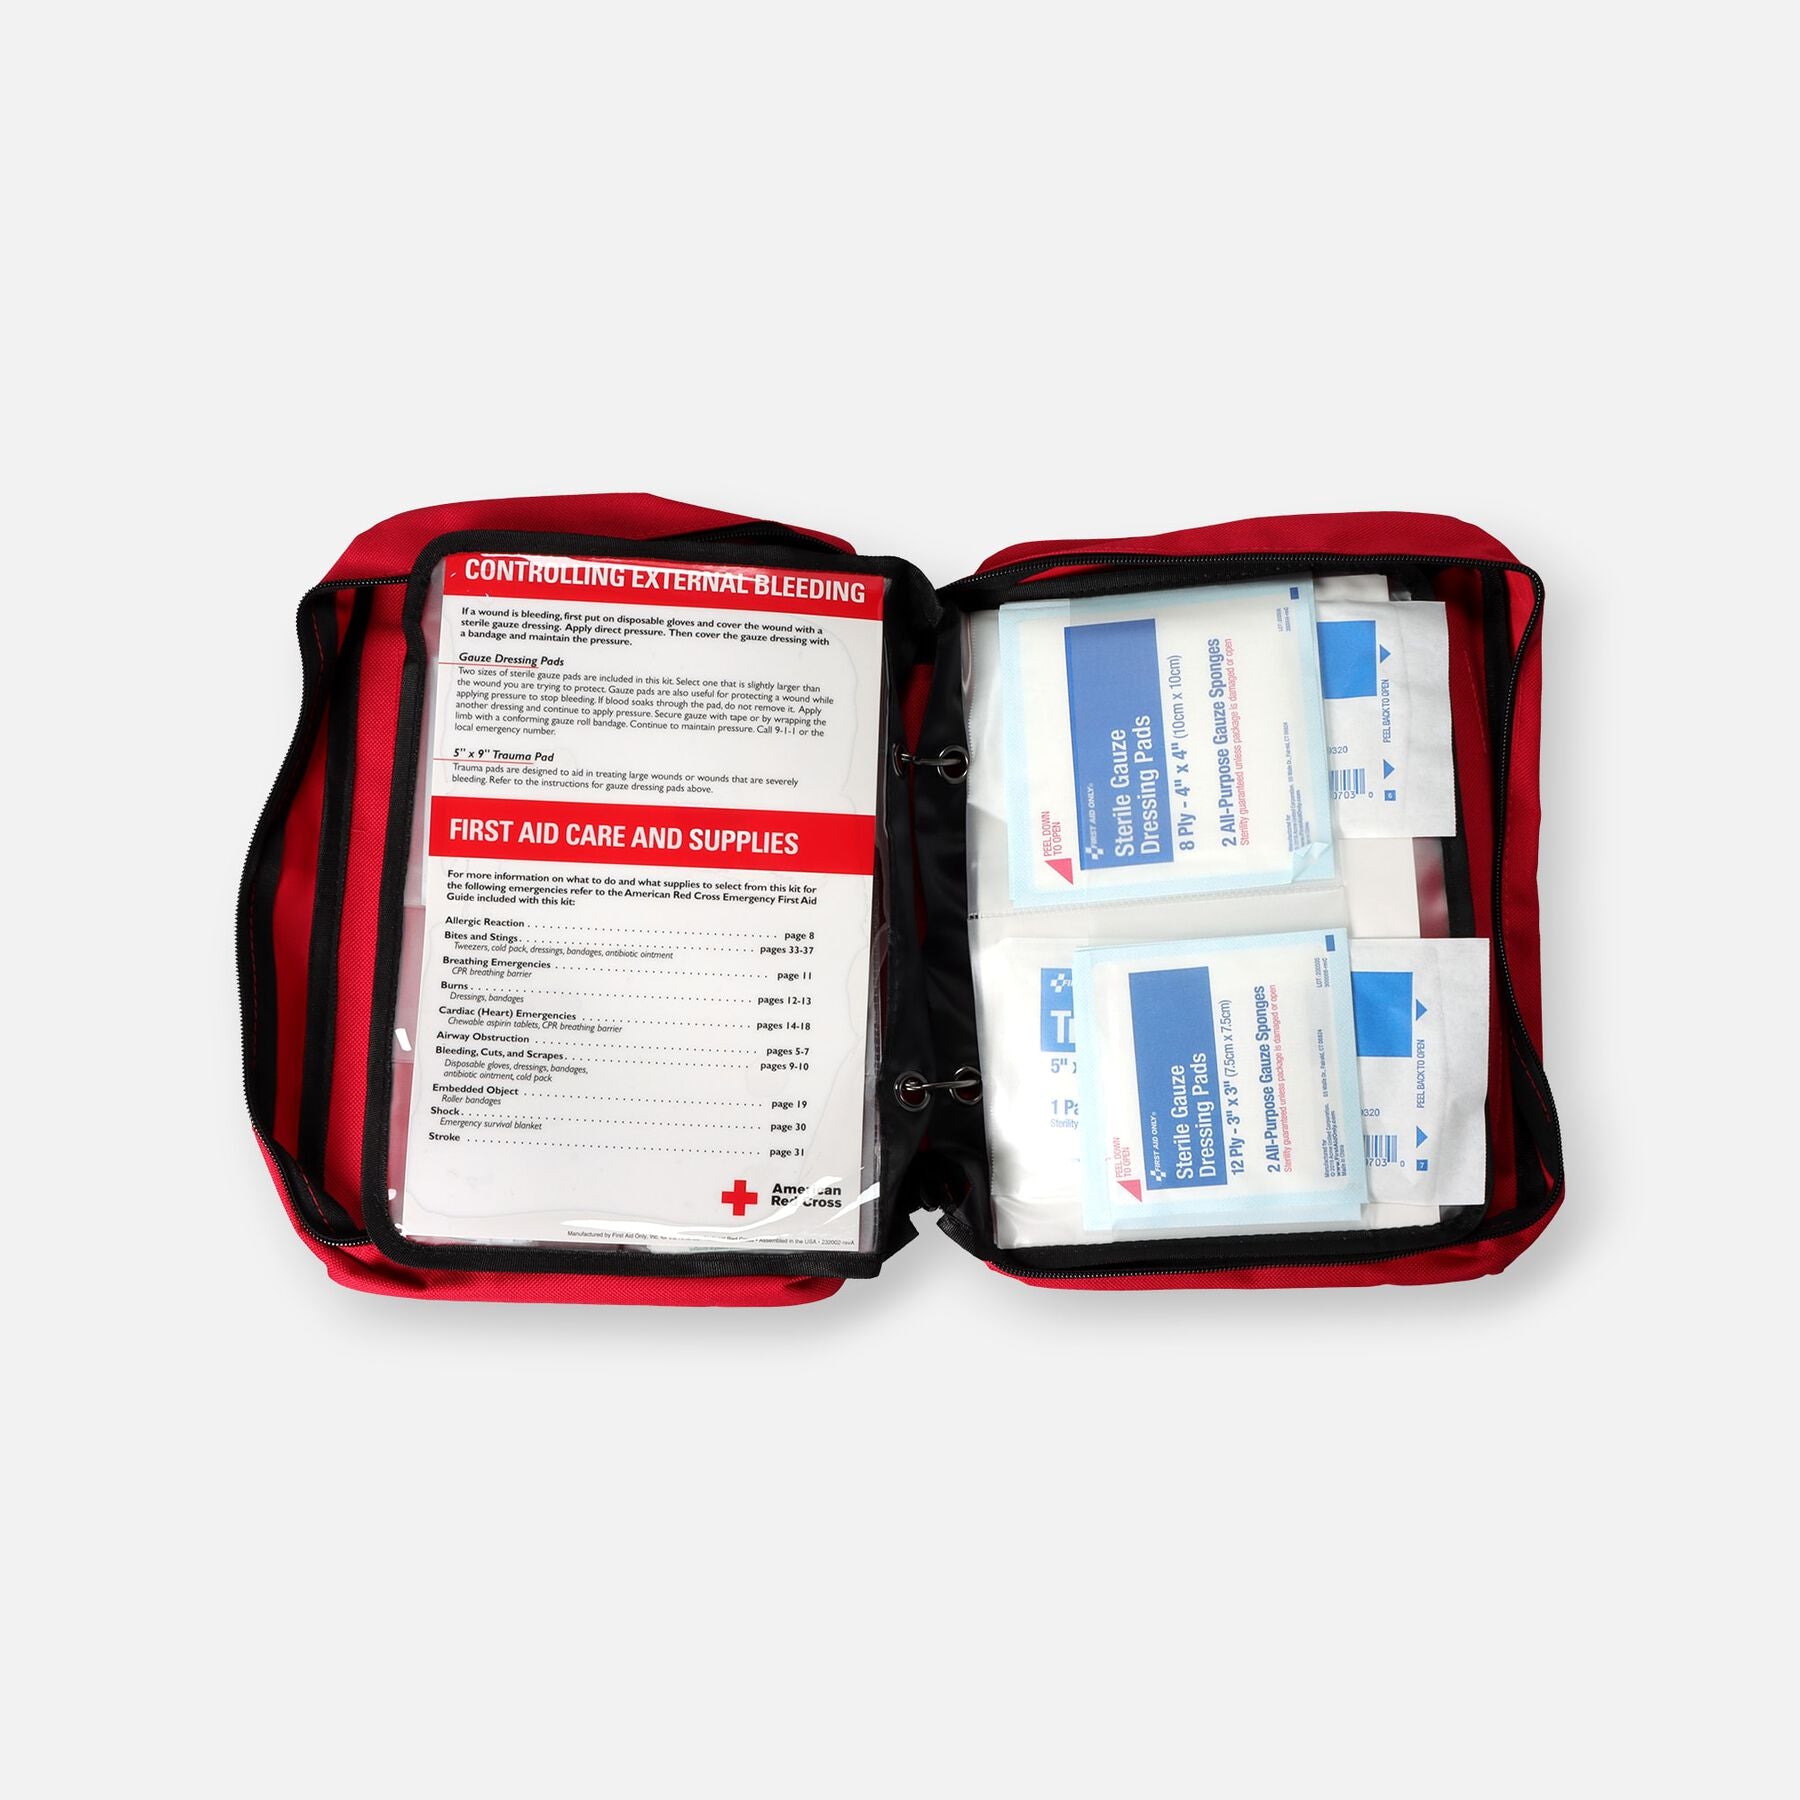 Family First Aid Kit-eSafety Supplies, Inc